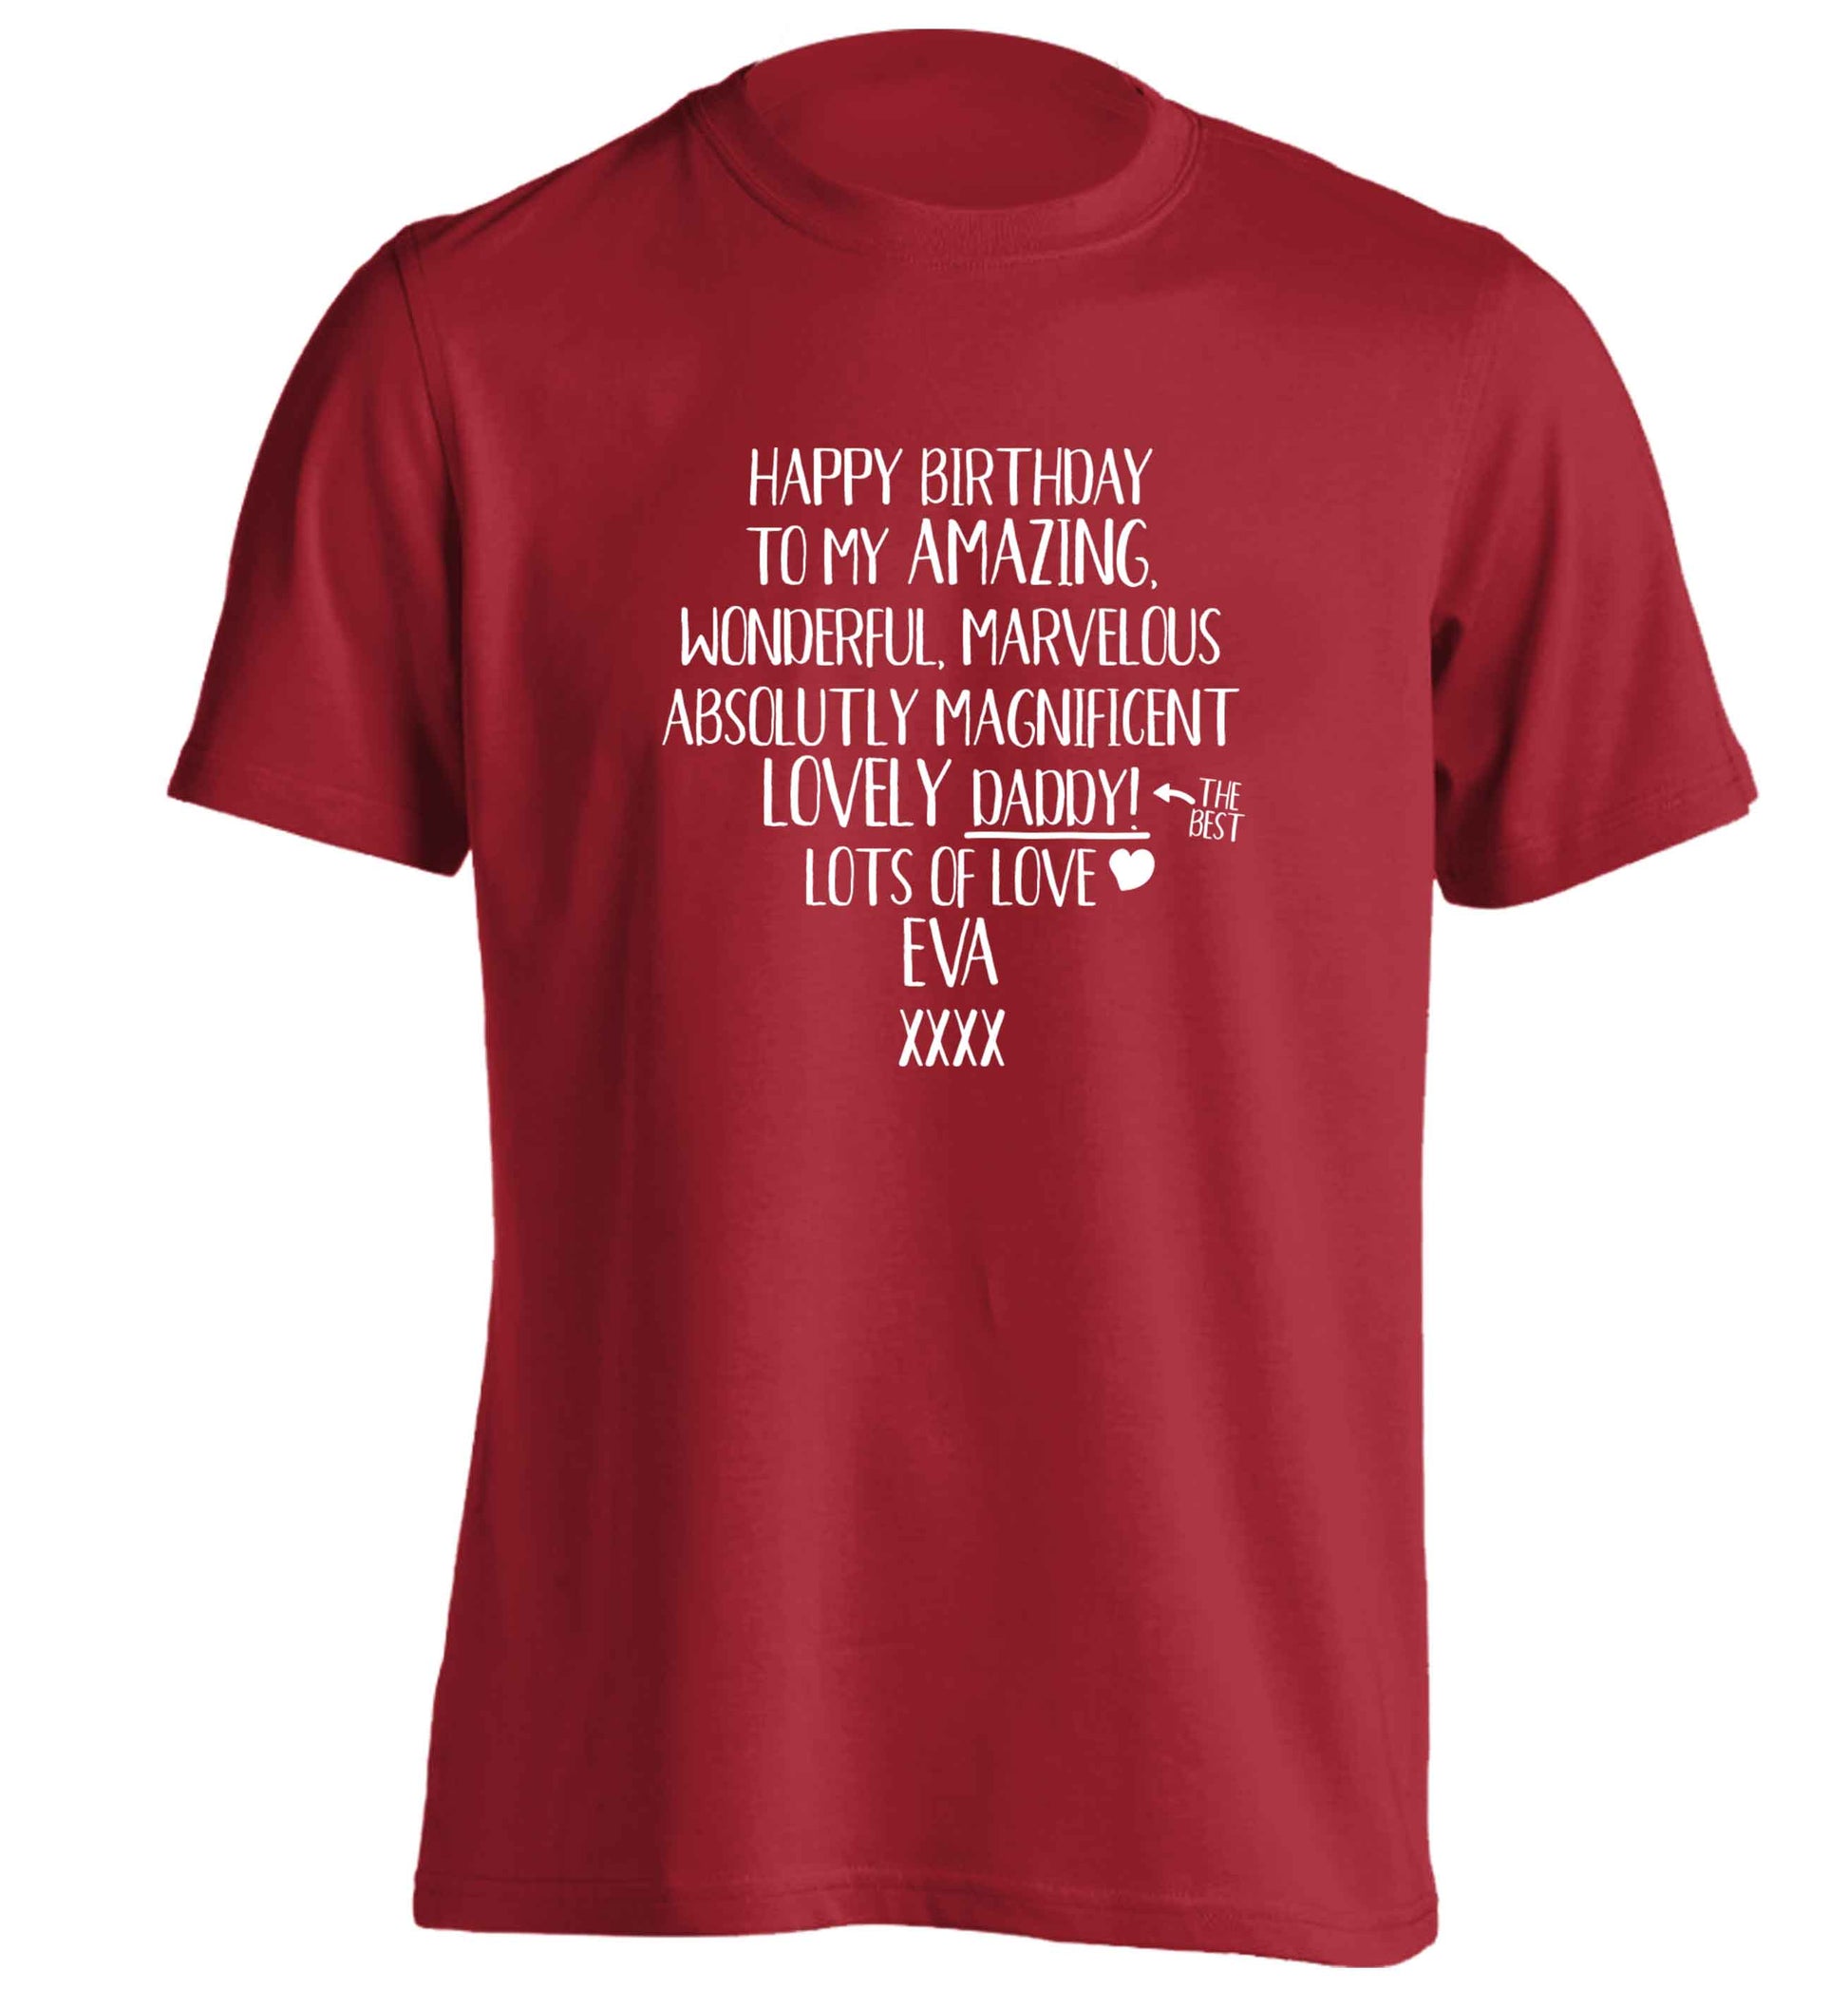 Personalised happy birthday to my amazing, wonderful, lovely daddy adults unisex red Tshirt 2XL